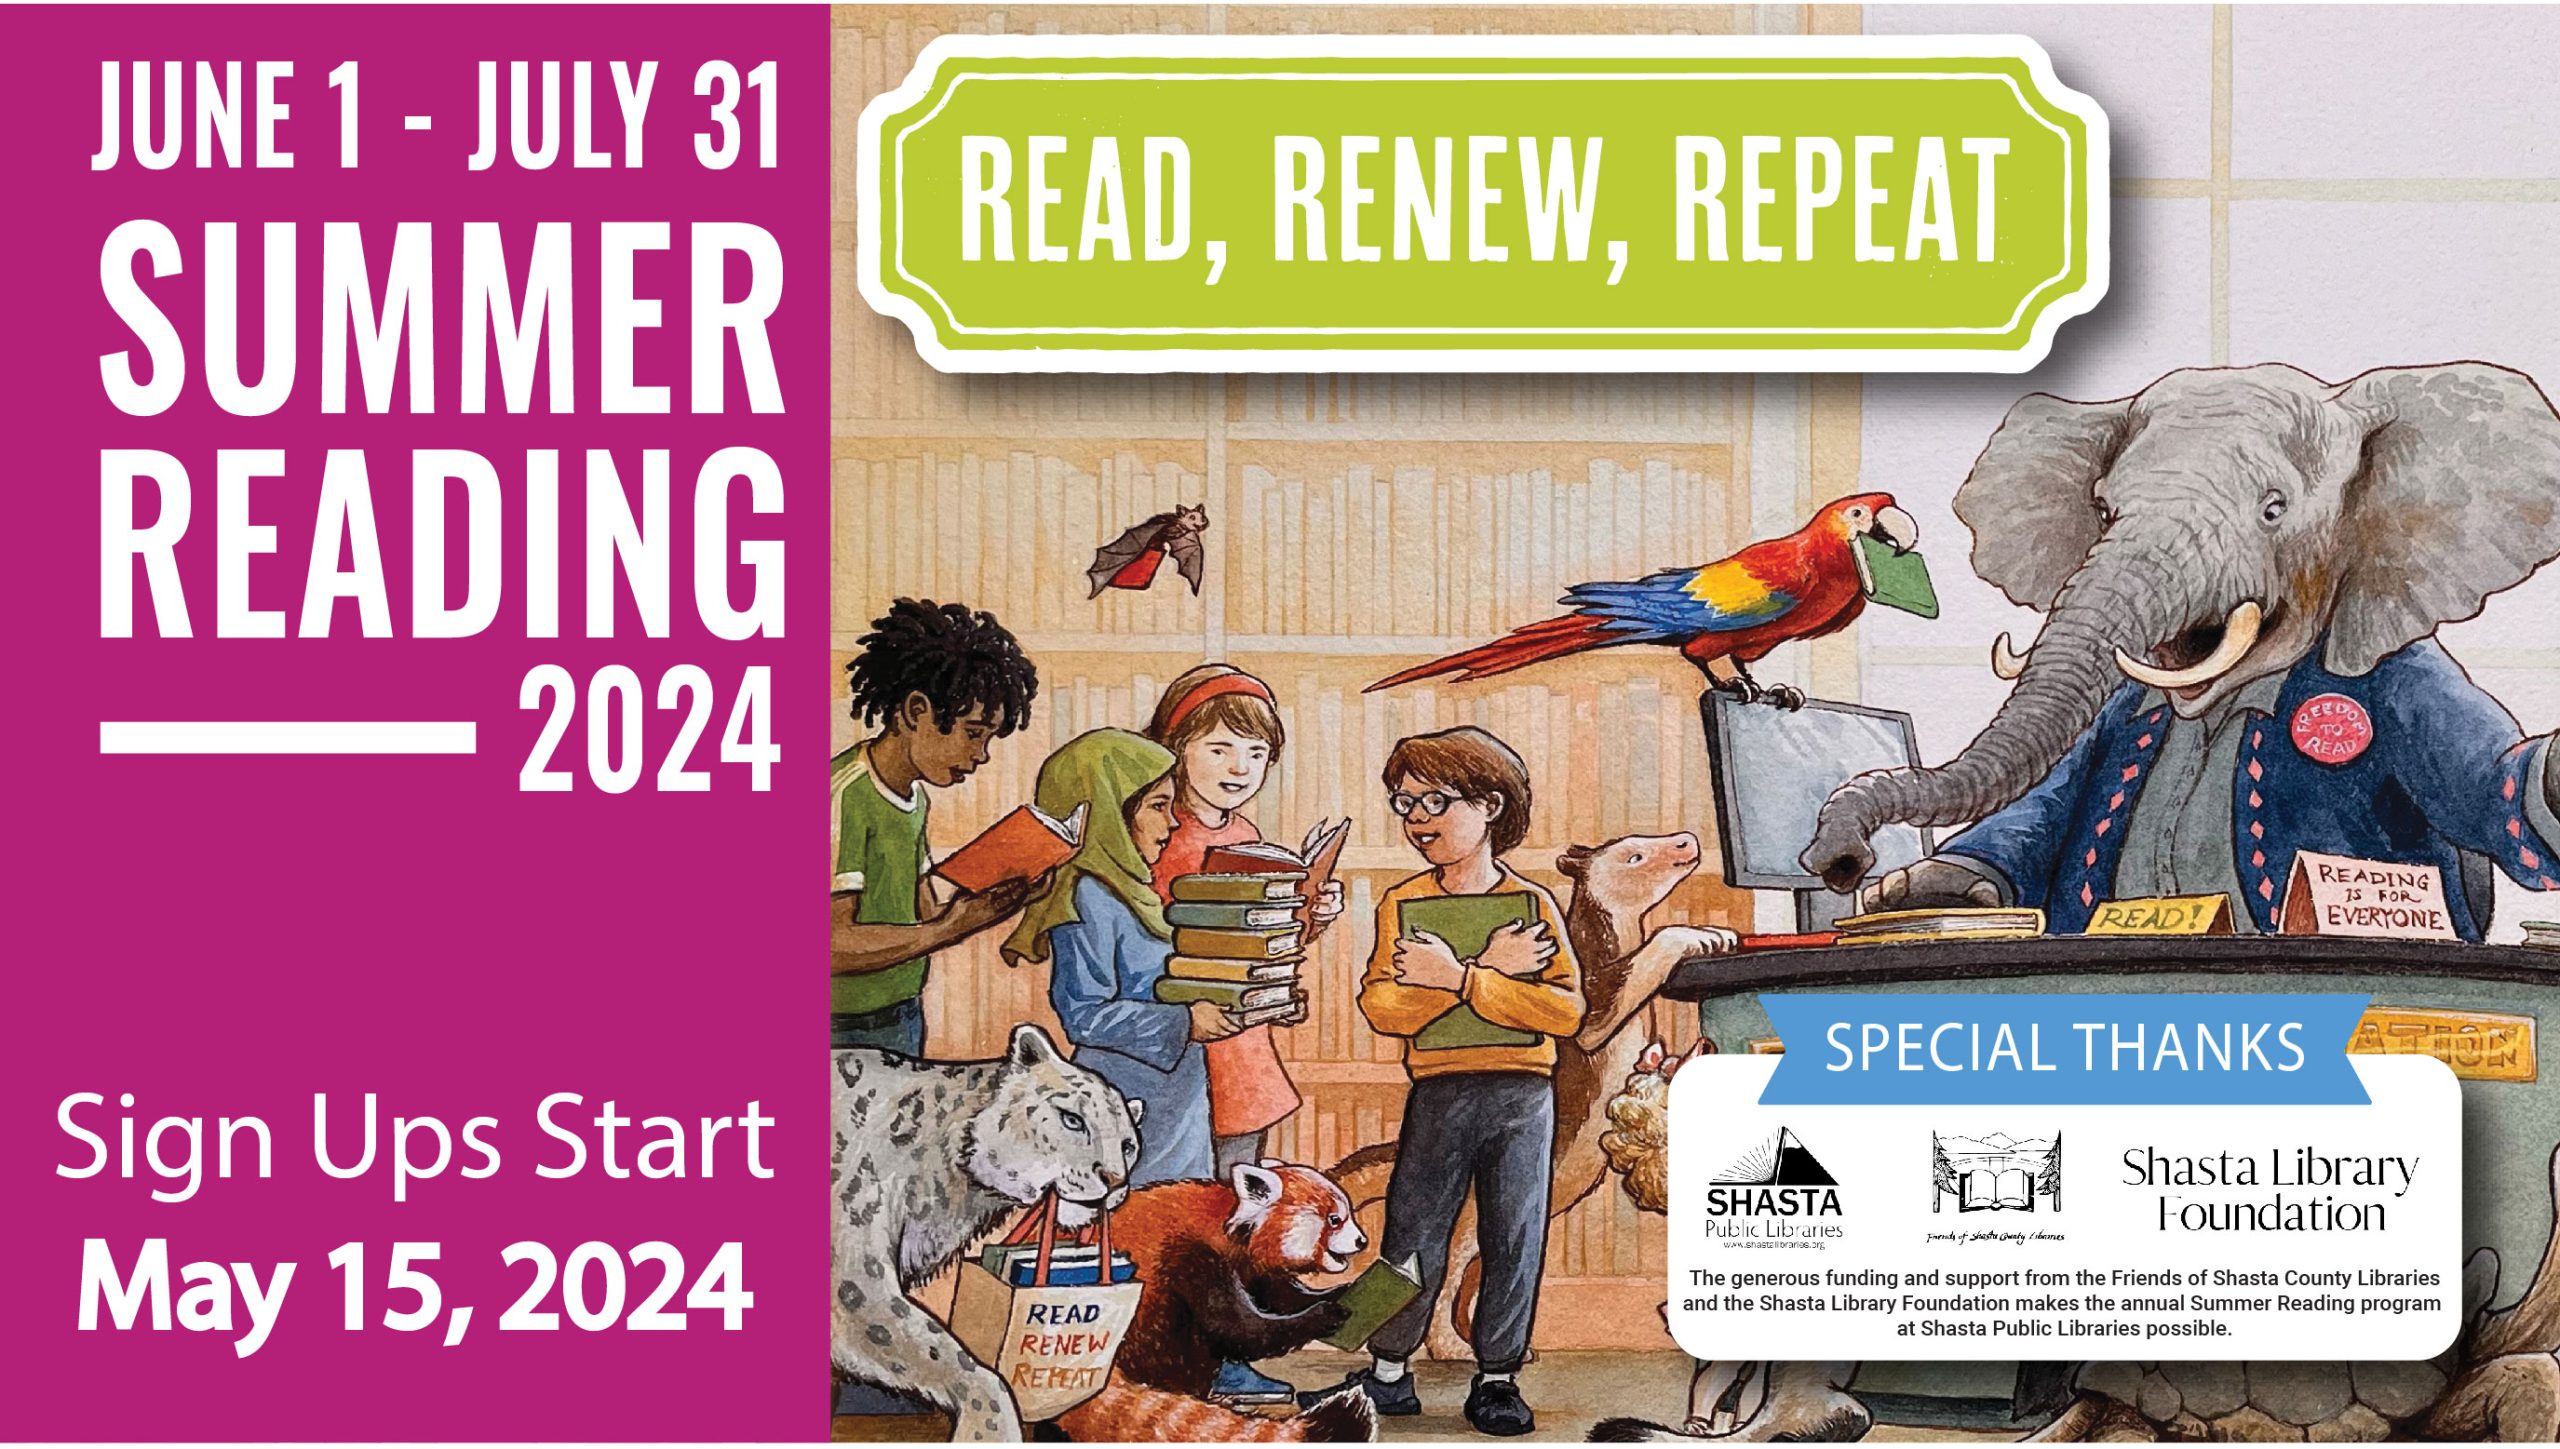 Find Your Voice! Summer Reading. June 1st to July 31st.